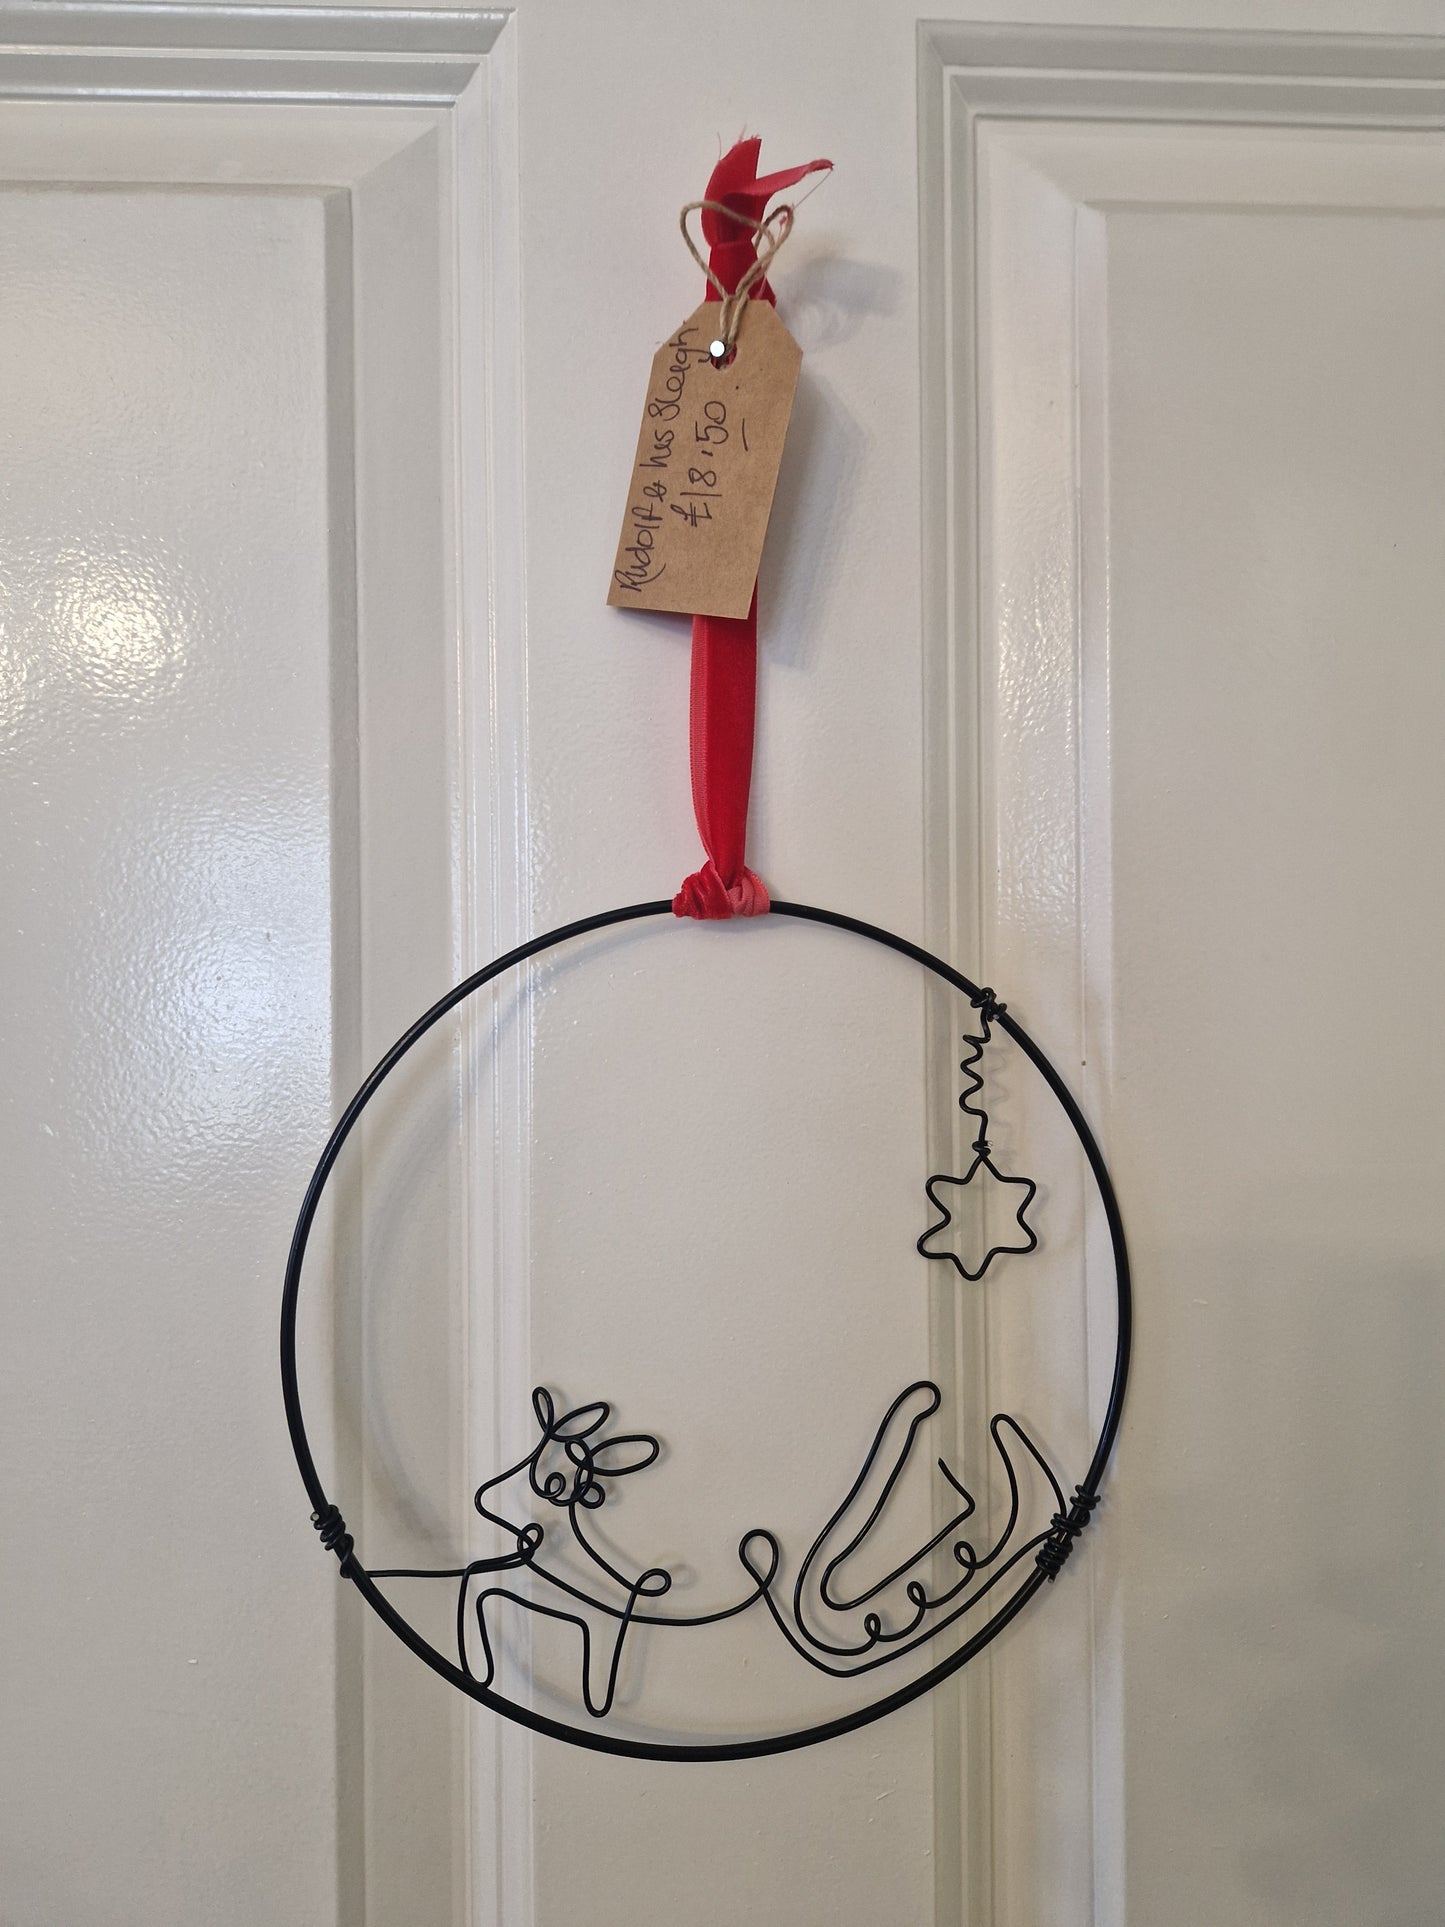 Handcrafted wire Christmas decor hoop.